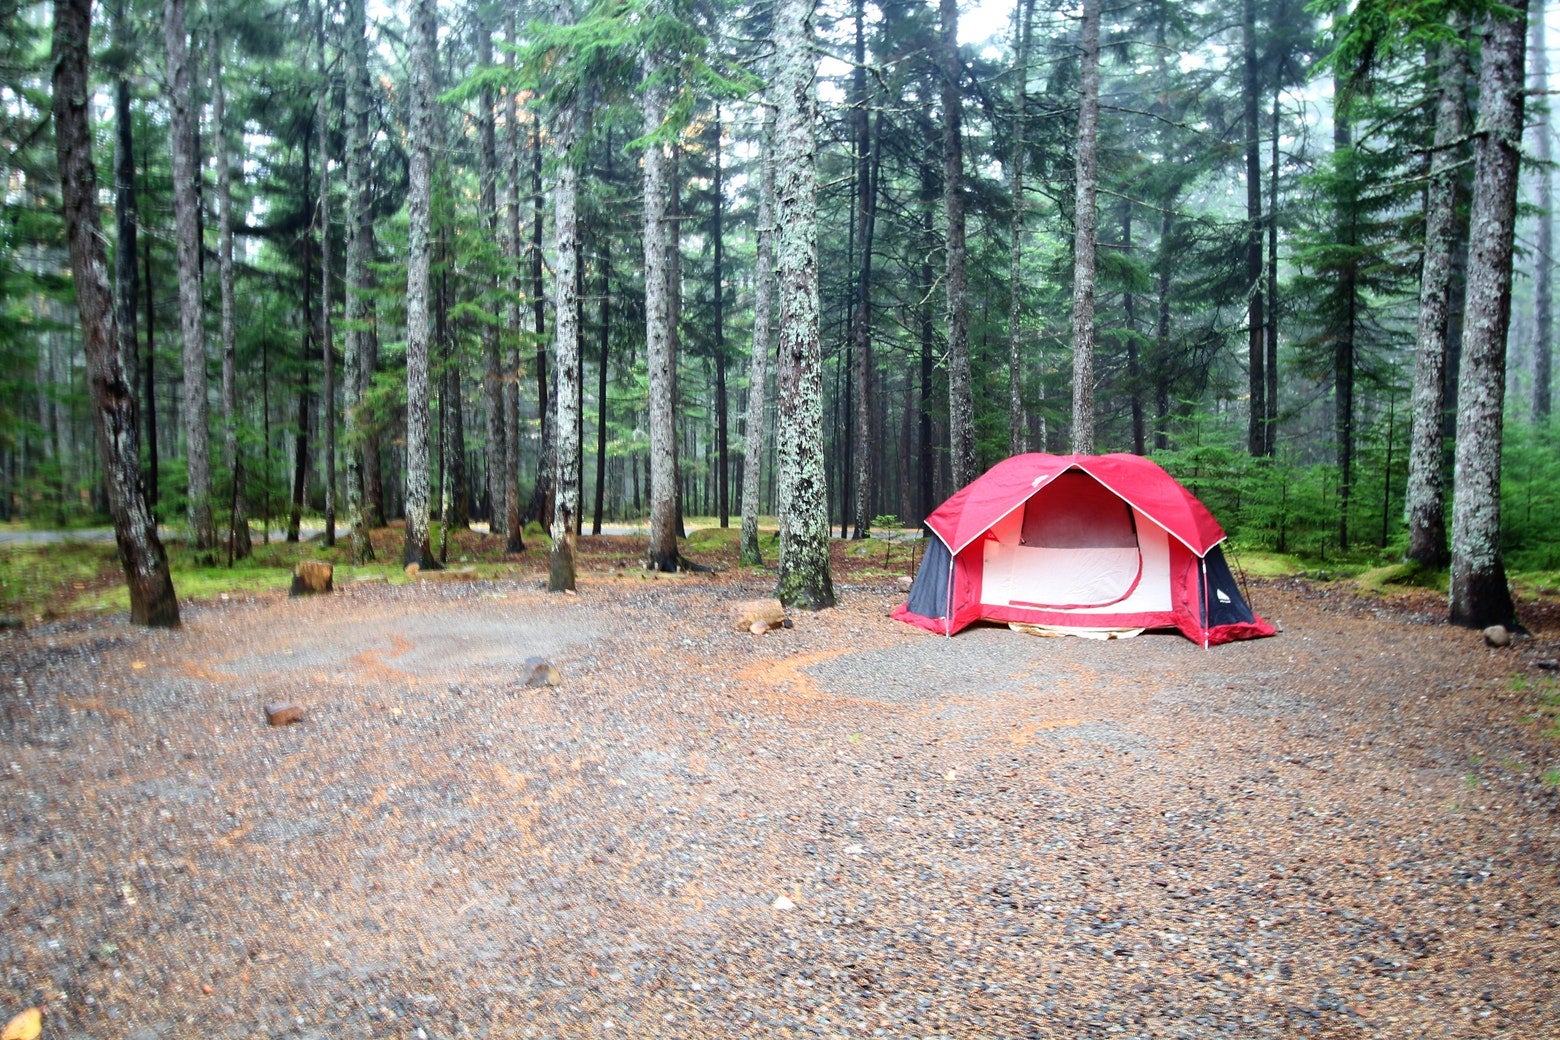 Red tent pitched in large campsite in the middle of a foggy forest.